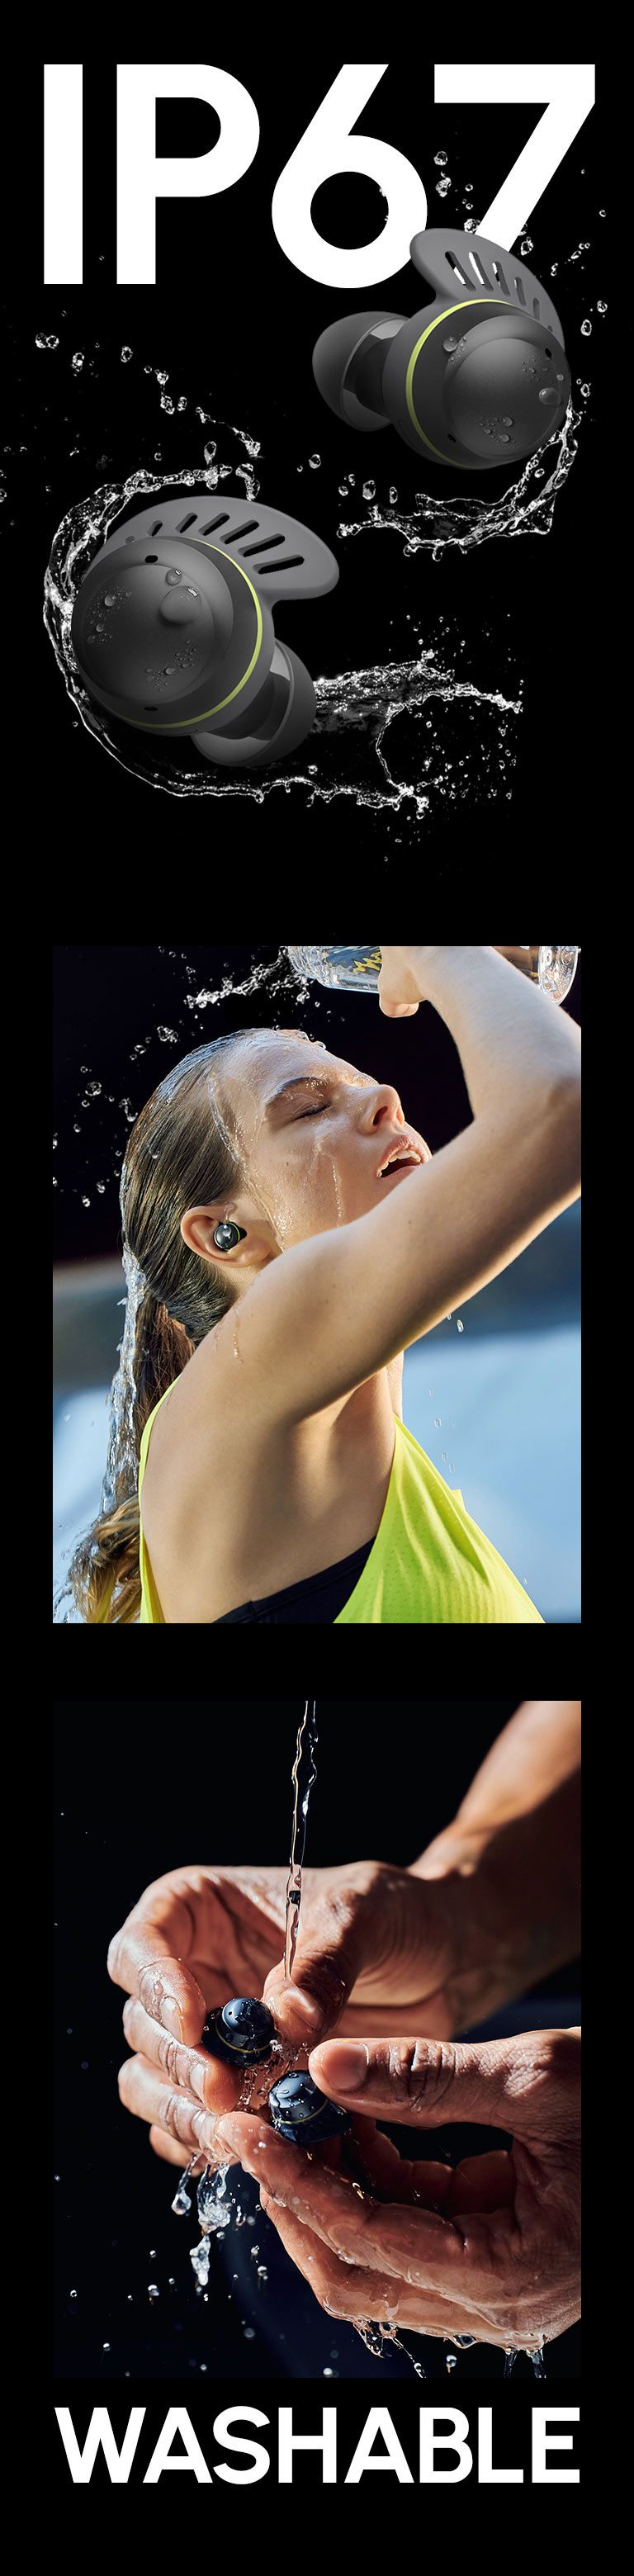 TONE Free fit earbuds in front of text saying IP67. The earbuds are surrounded by water and water droplets.  A woman with her hair tied up is shown on the left, wearing a TONE Free fit product, pouring water on her face, and a man's hand washing the TONE Free fit earbuds with water is shown on the right.